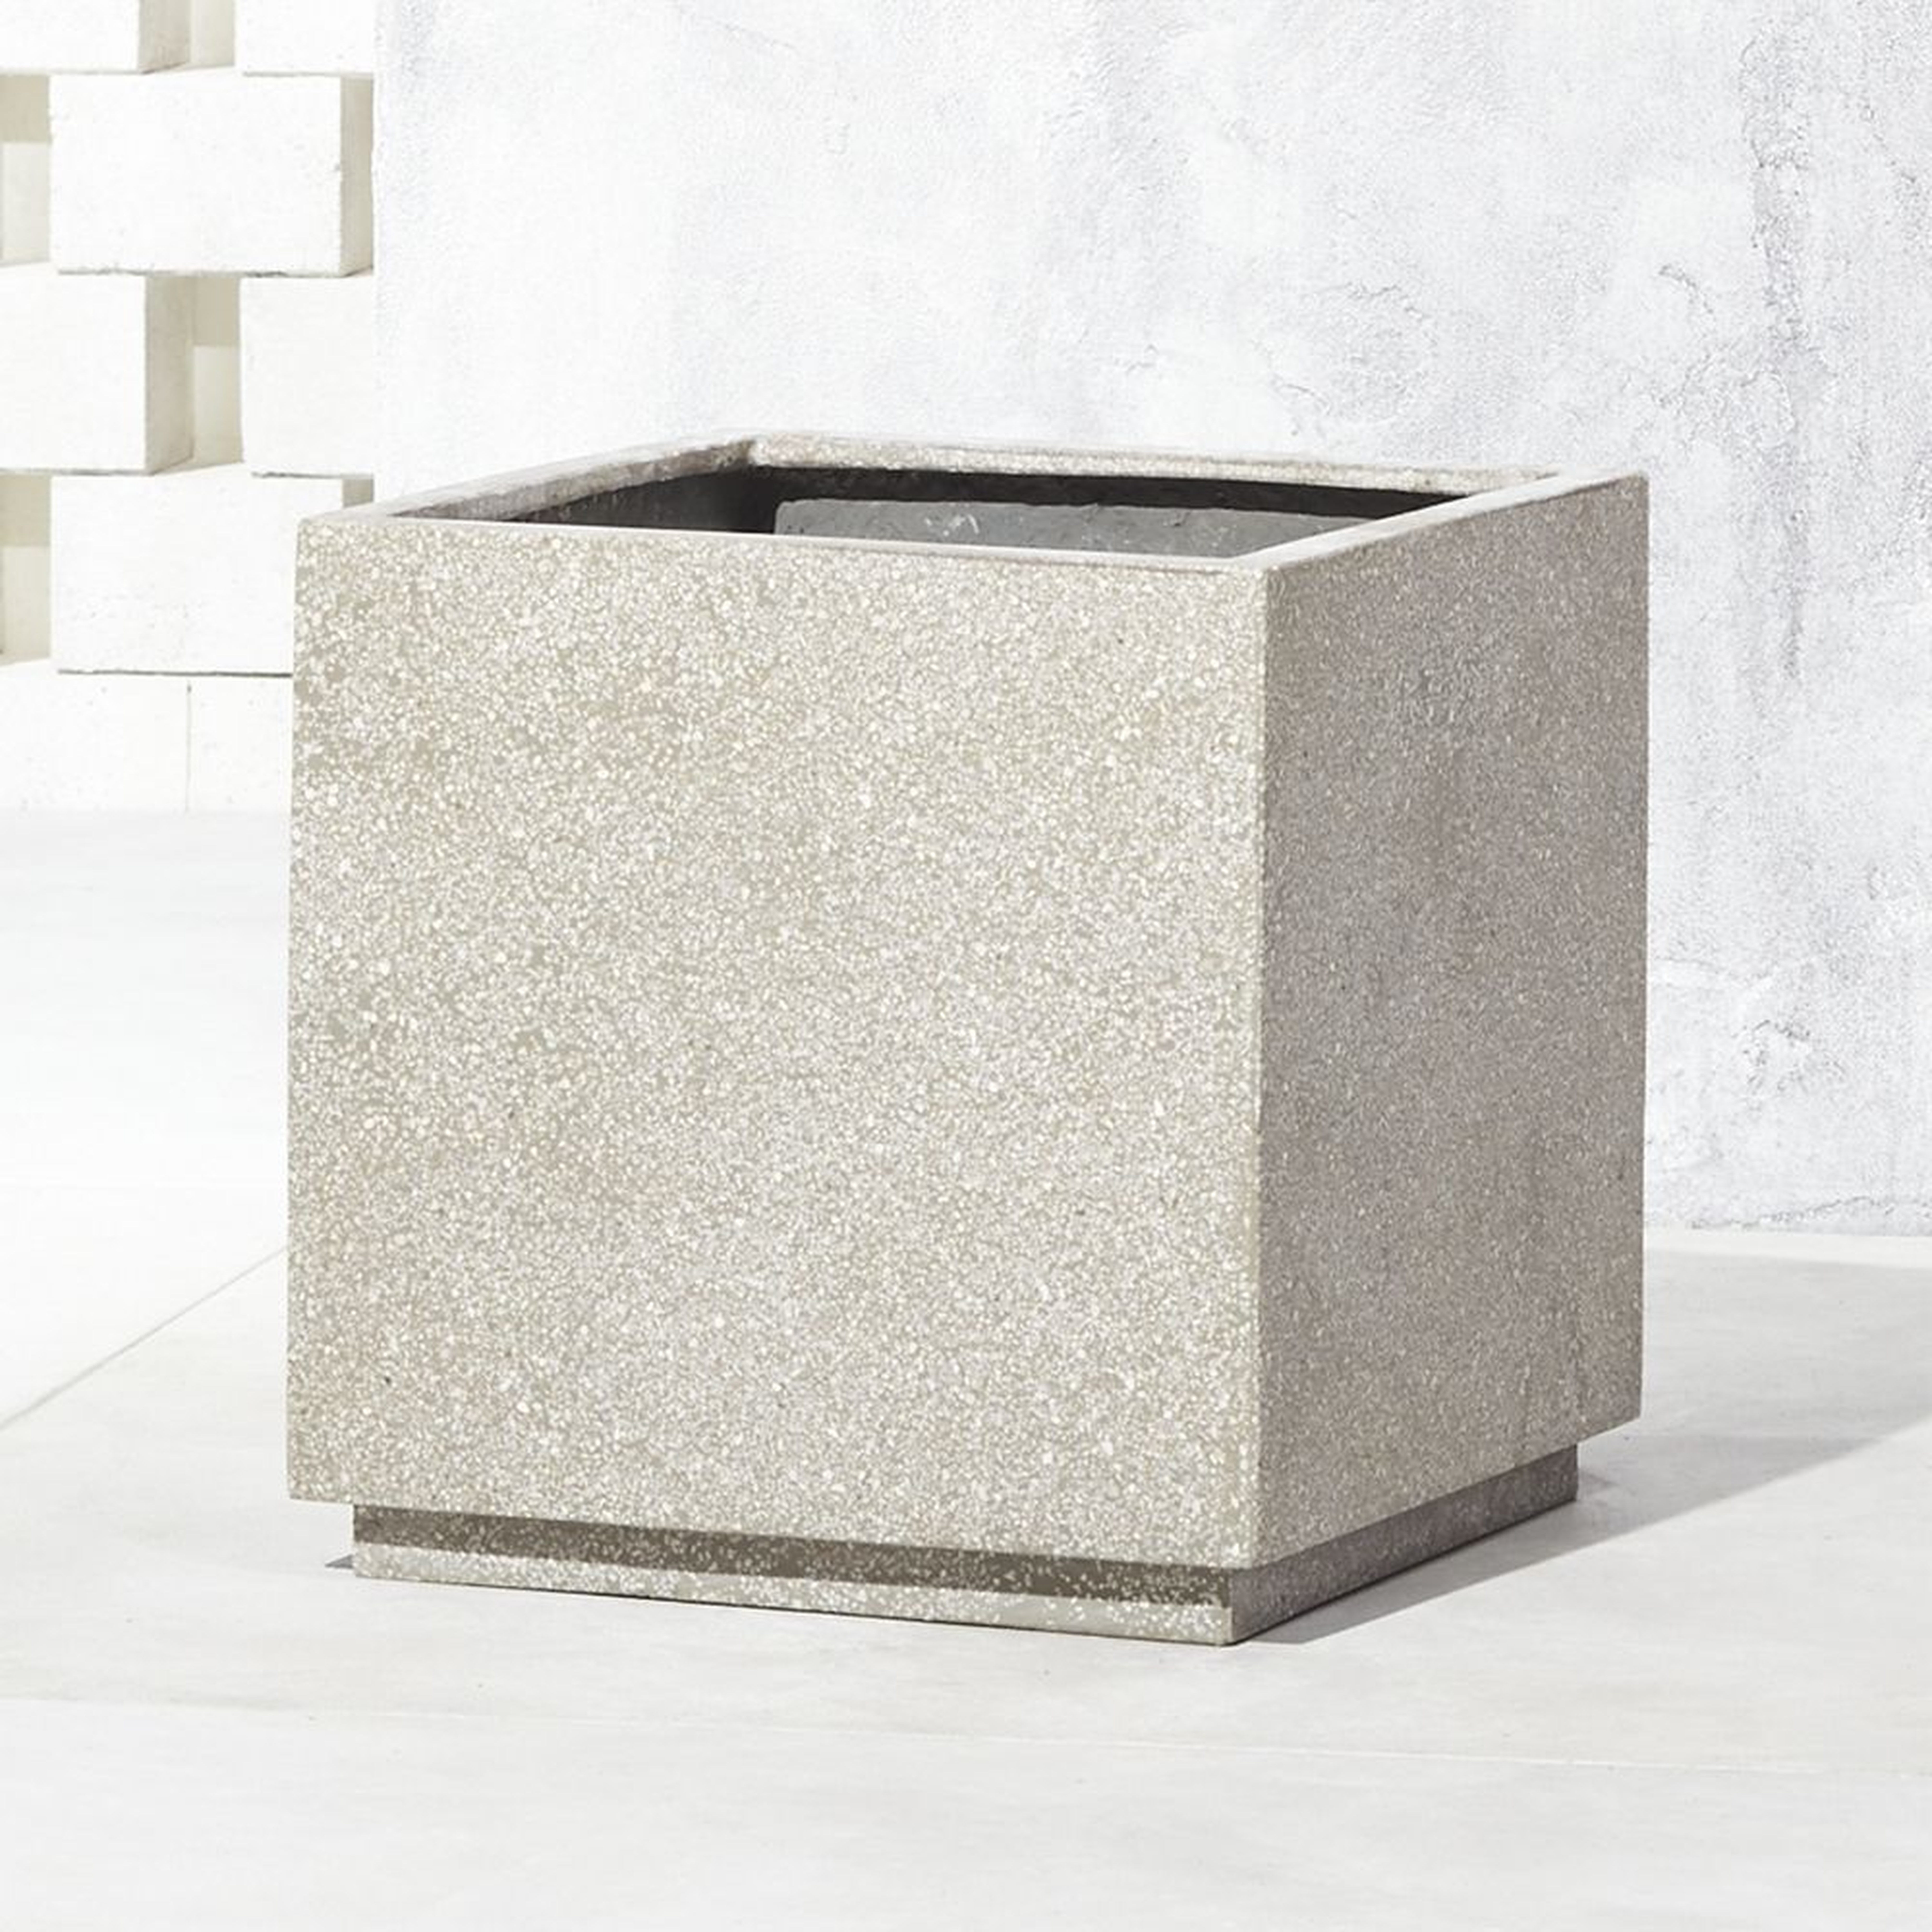 Playa Square Grey Stone Indoor/Outdoor Planter Large - CB2